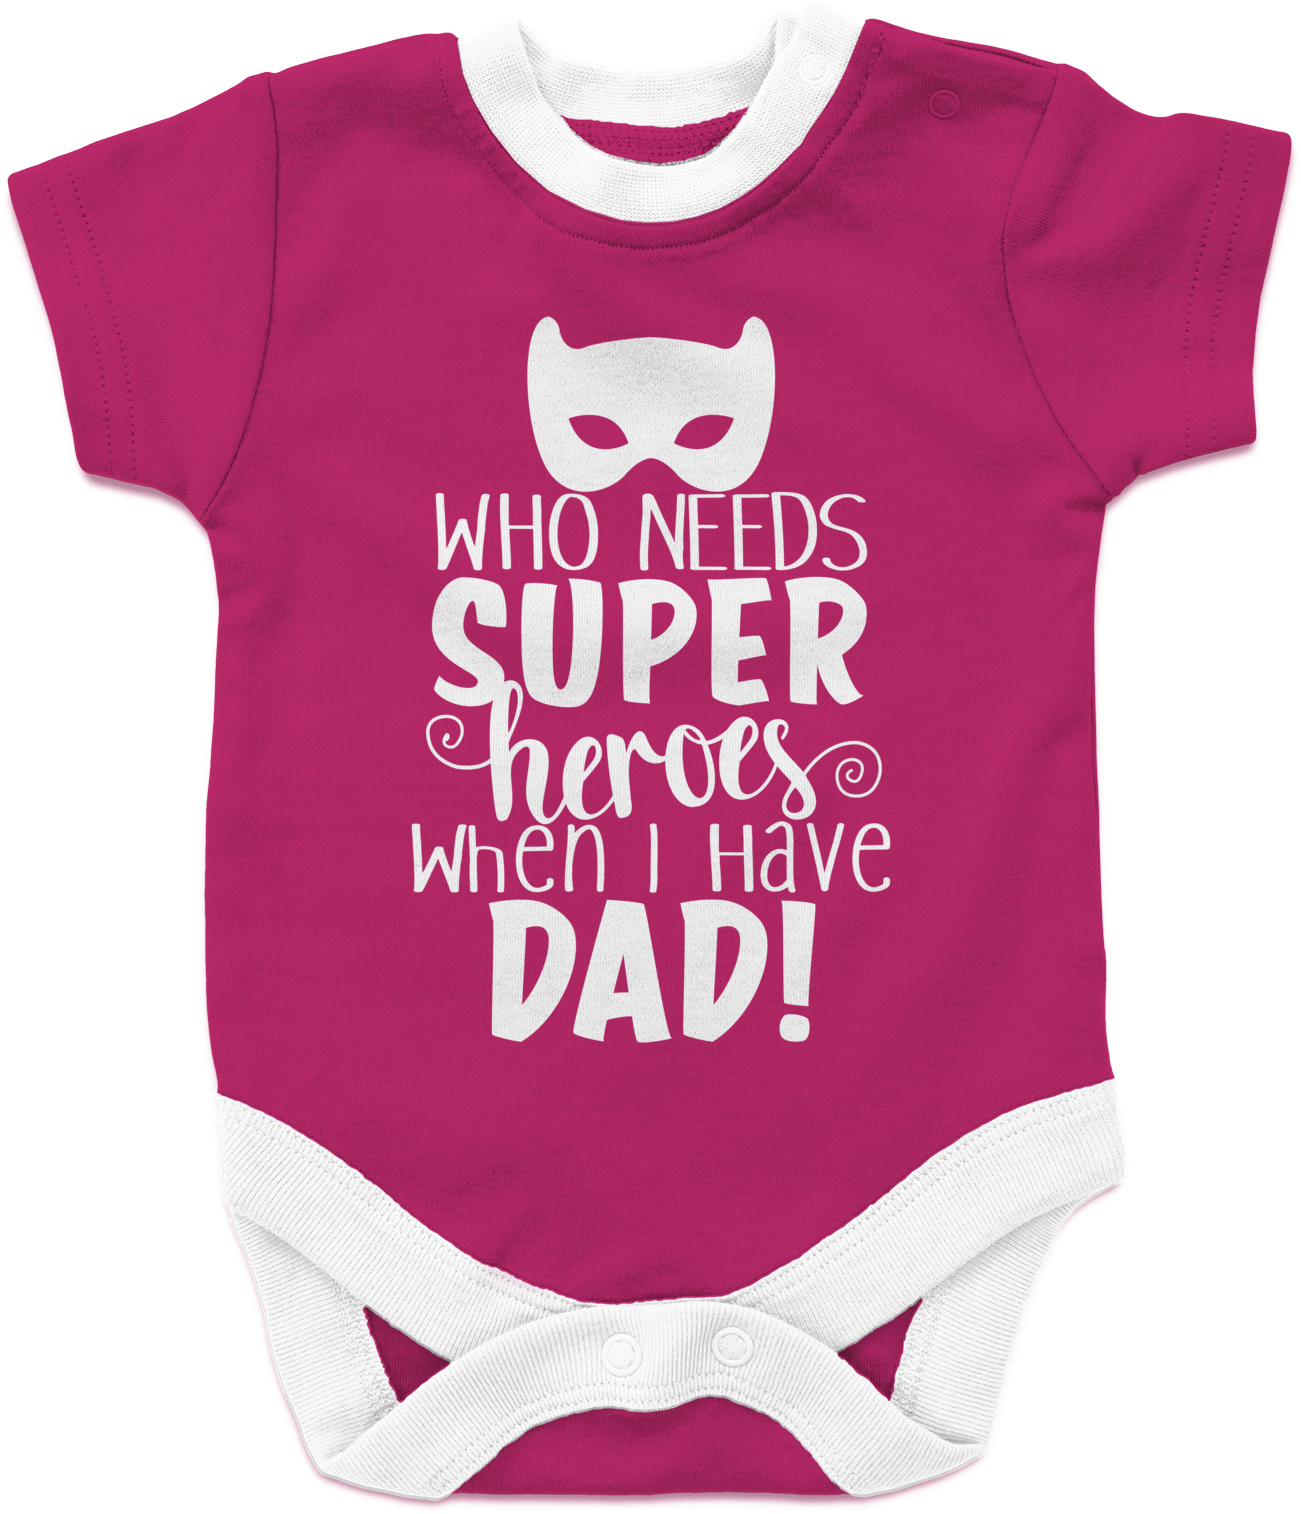 Who Needs Super Heroes When I Have Dad Baby Onesies - Infant Bodysuit (1635x1635)